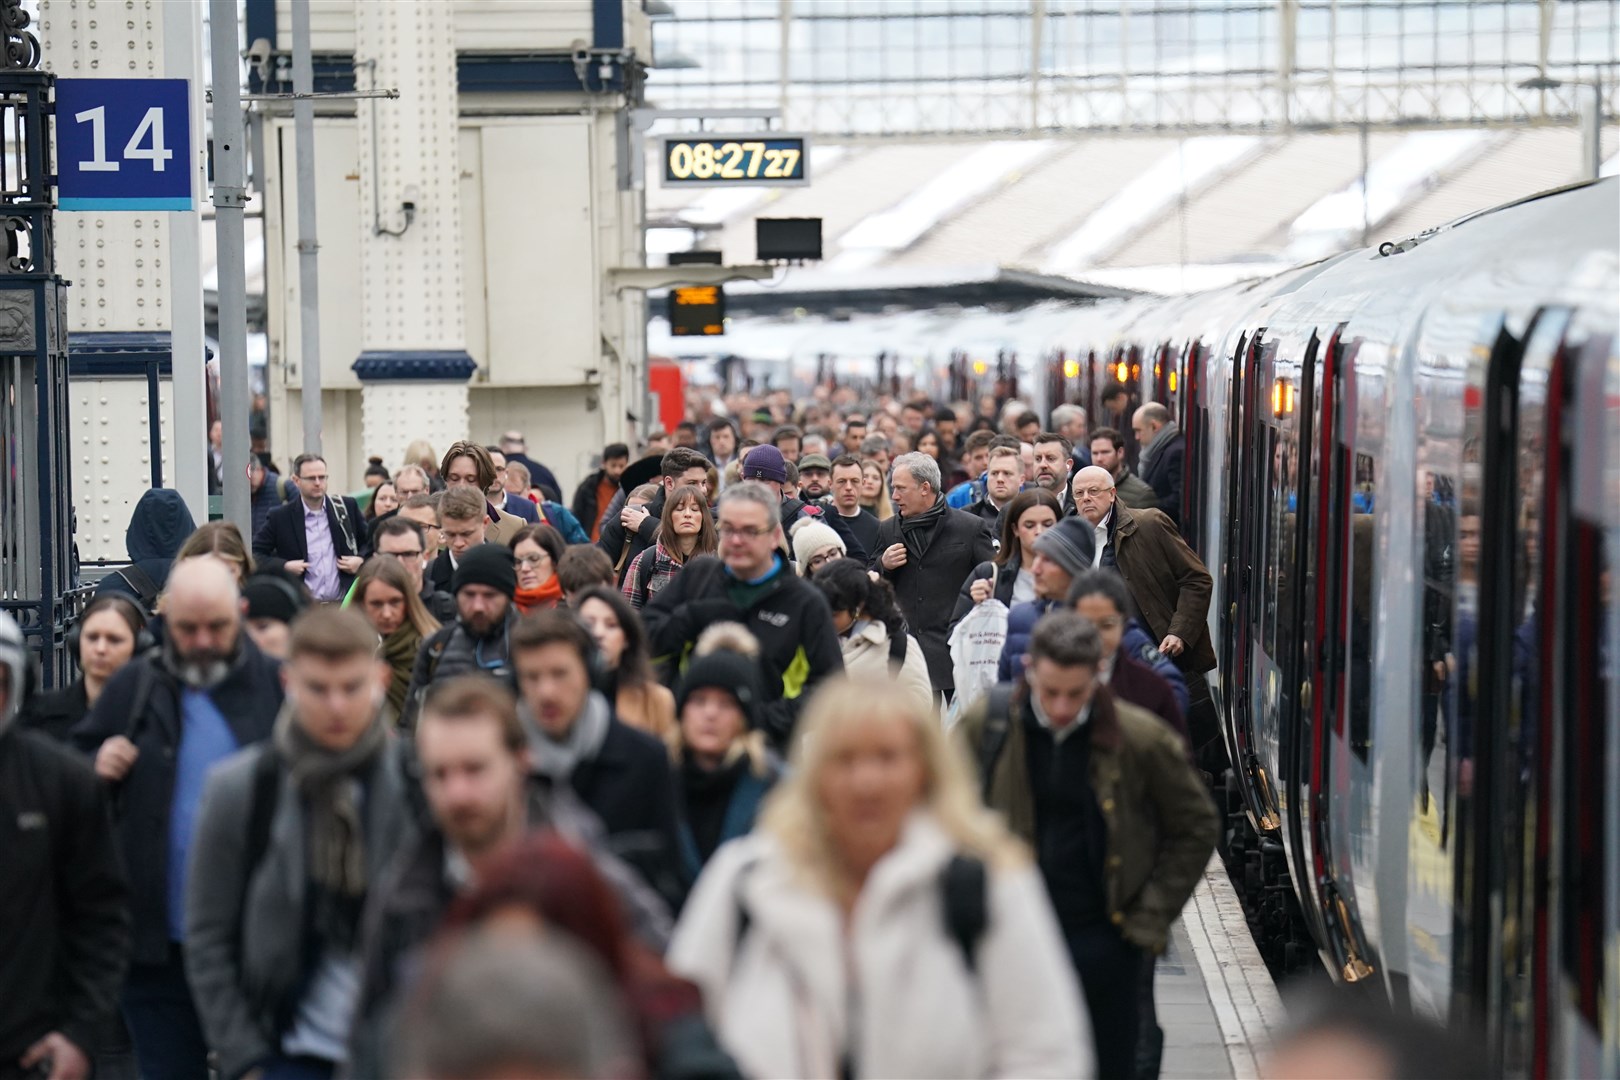 Rail passengers have been hit by the largest increase in fares for more than a decade despite record poor reliability (James Manning/PA)